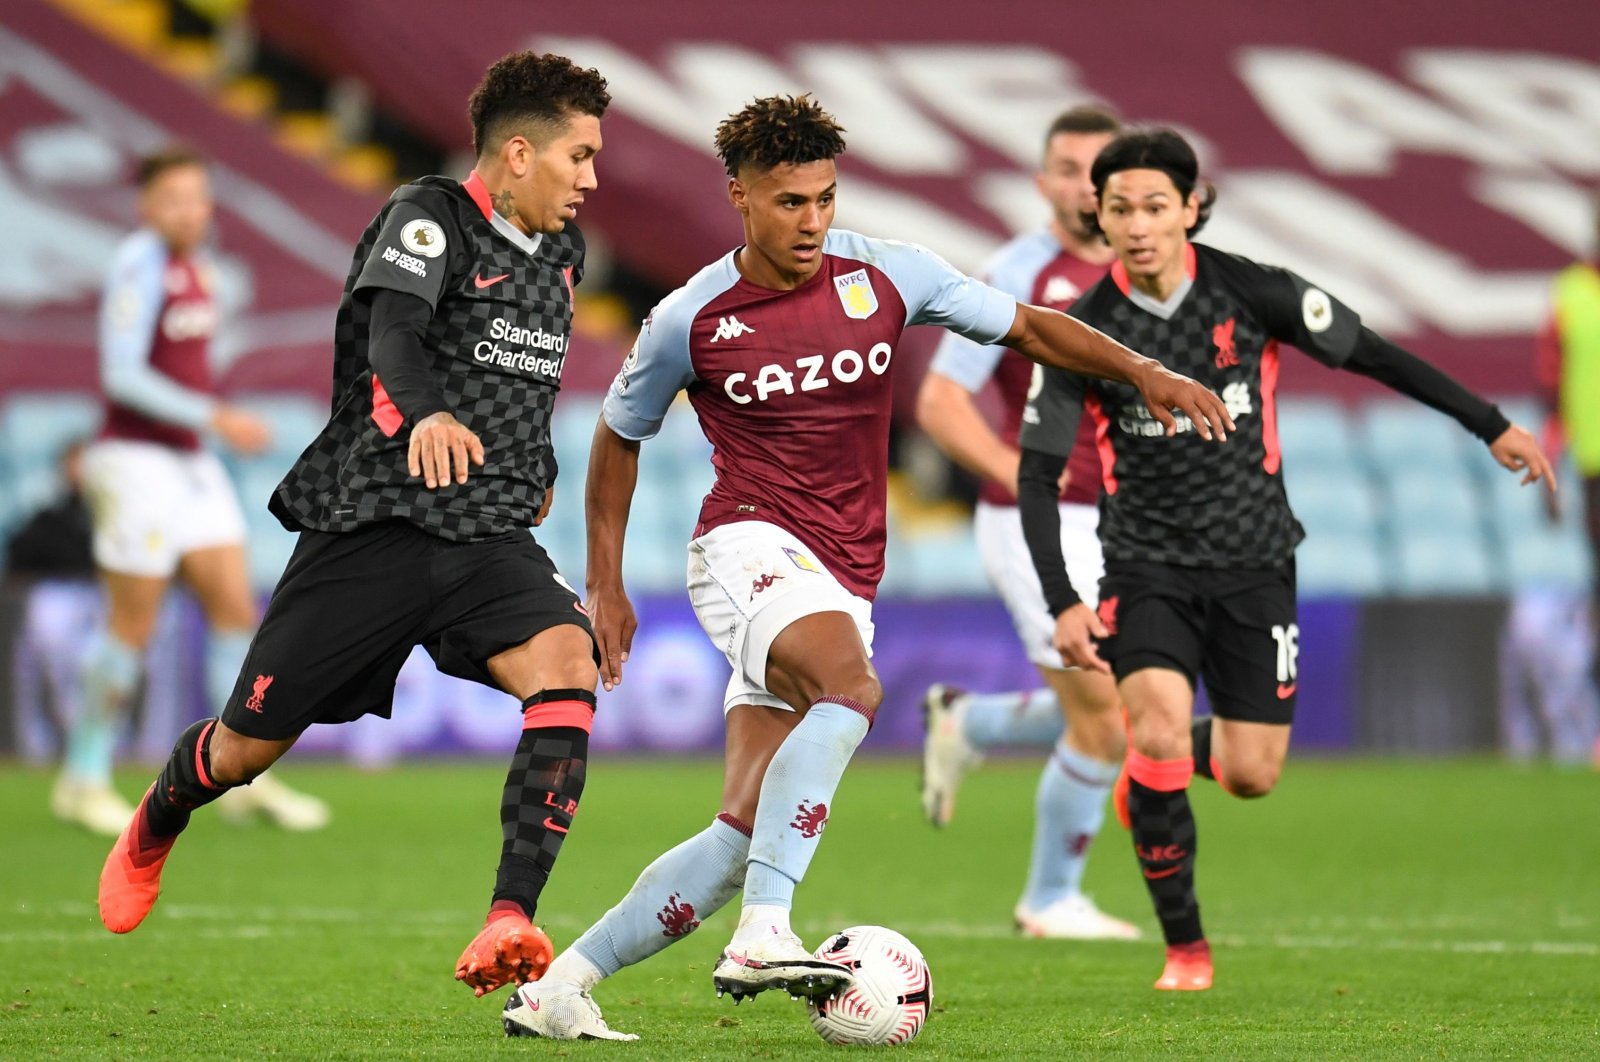 Aston Villa's Ollie Watkins (C) tries to dribble past Liverpool's Roberto Firmino (L) and Takumi Minamino during a Premier League match, in Birmingham, Britain, Oct. 4, 2020. (Reuters Photo)